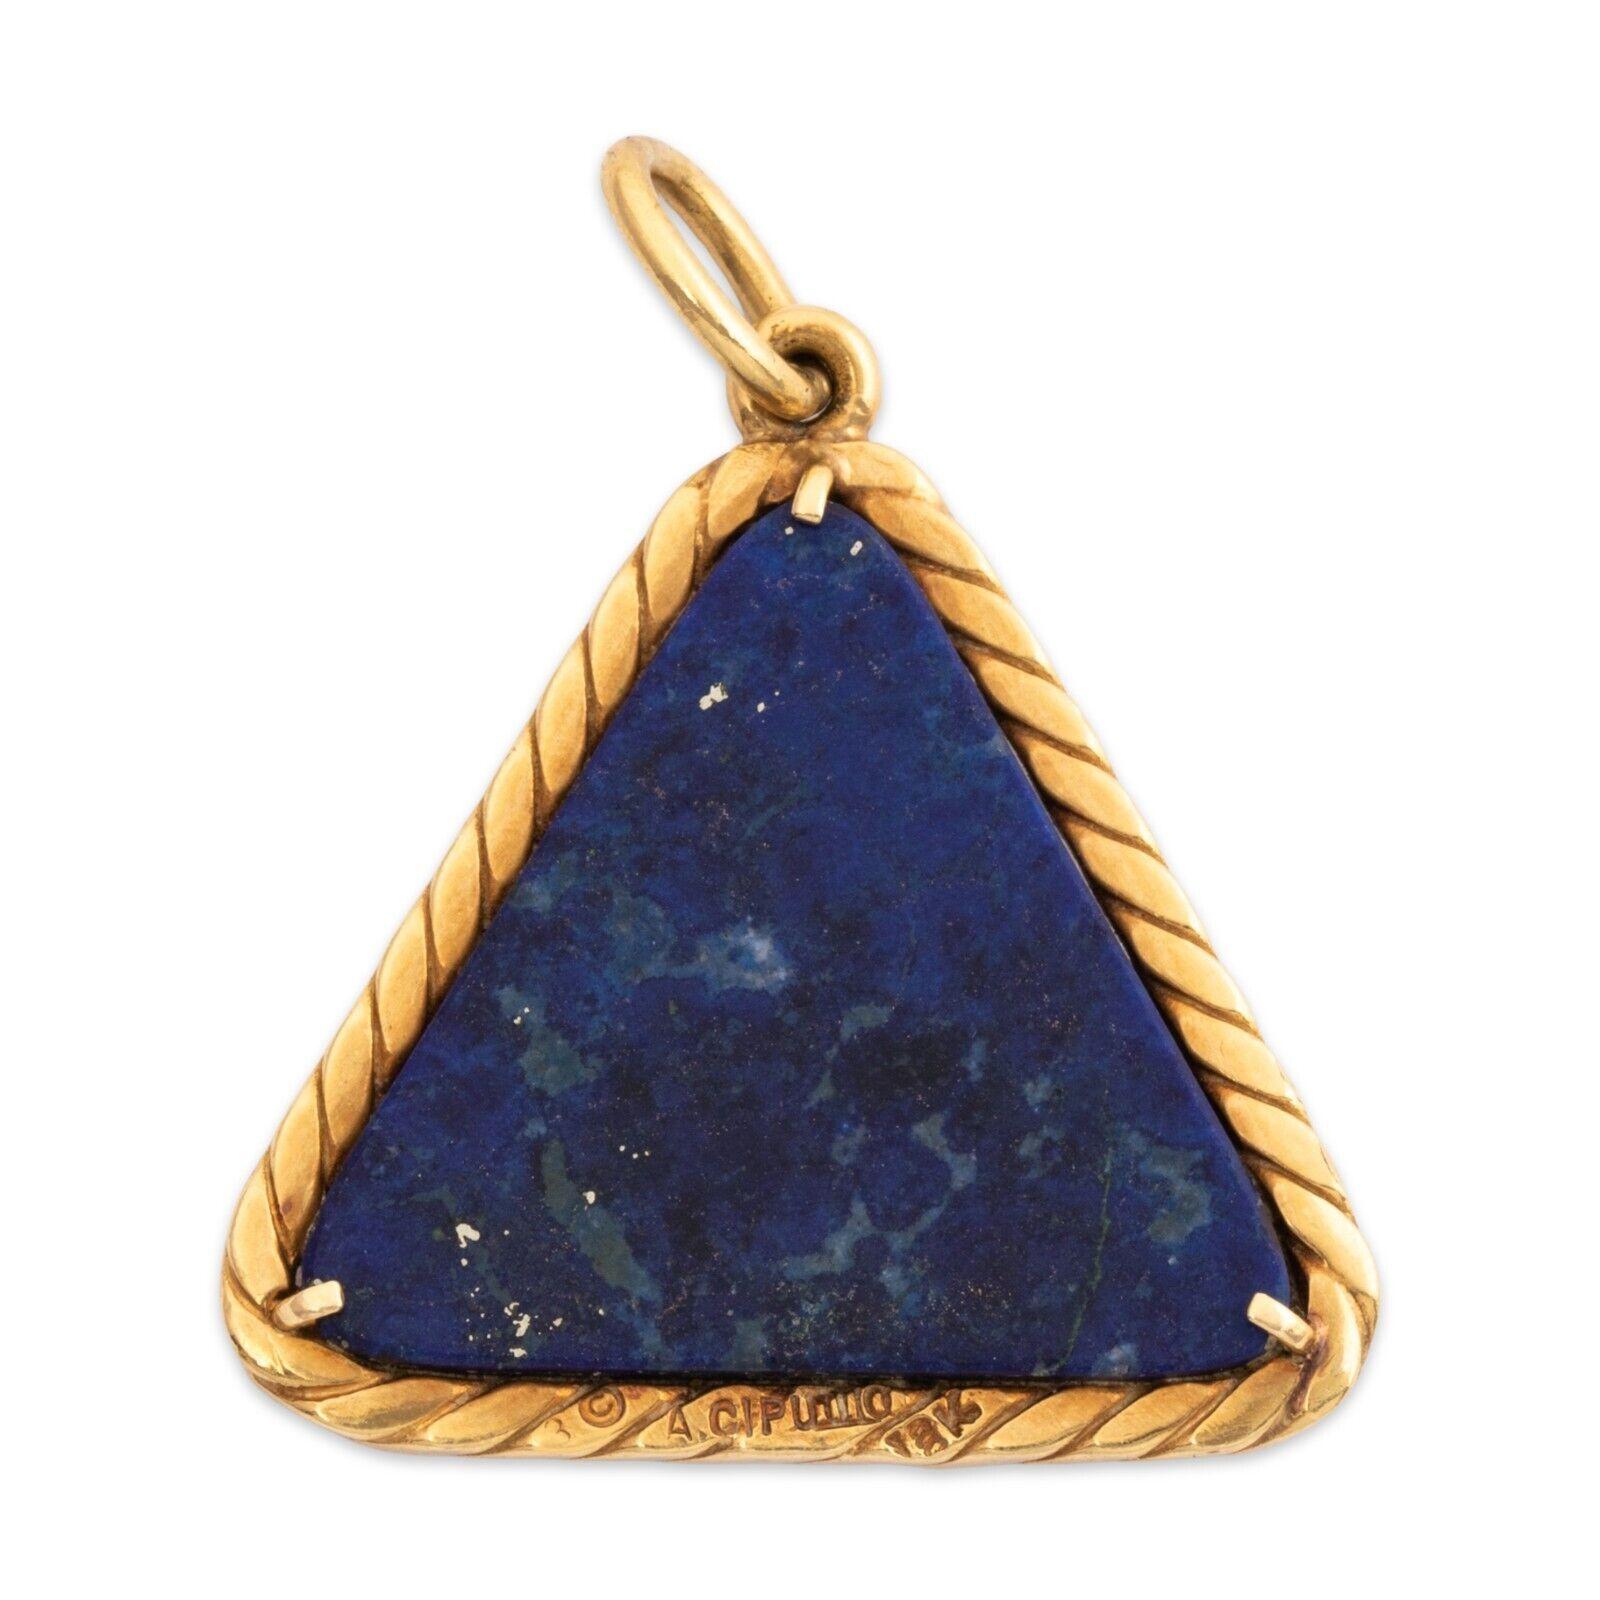 Aldo Cipullo 18k Yellow Gold & Lapis Pisces Pendant Zodiac Circa 1970s Vintage

Here is your chance to purchase a beautiful and highly collectible designer zodiac pendant.   

Aldo Cipullo, Italian born American jeweler who worked for David Webb,